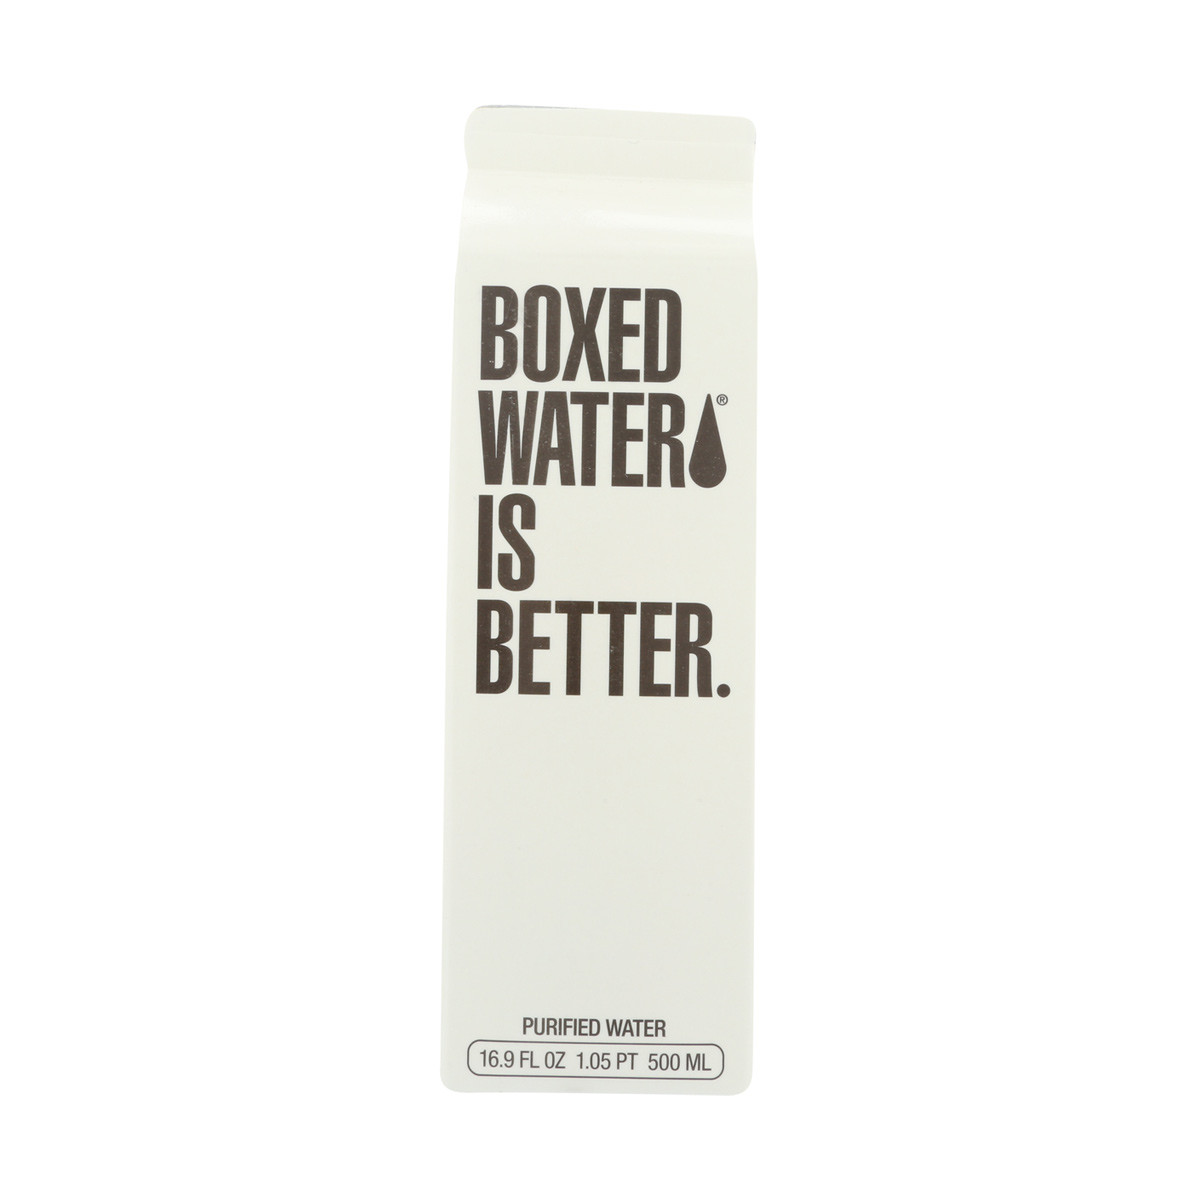 Boxed Water Purified Water, 16.9 fl oz